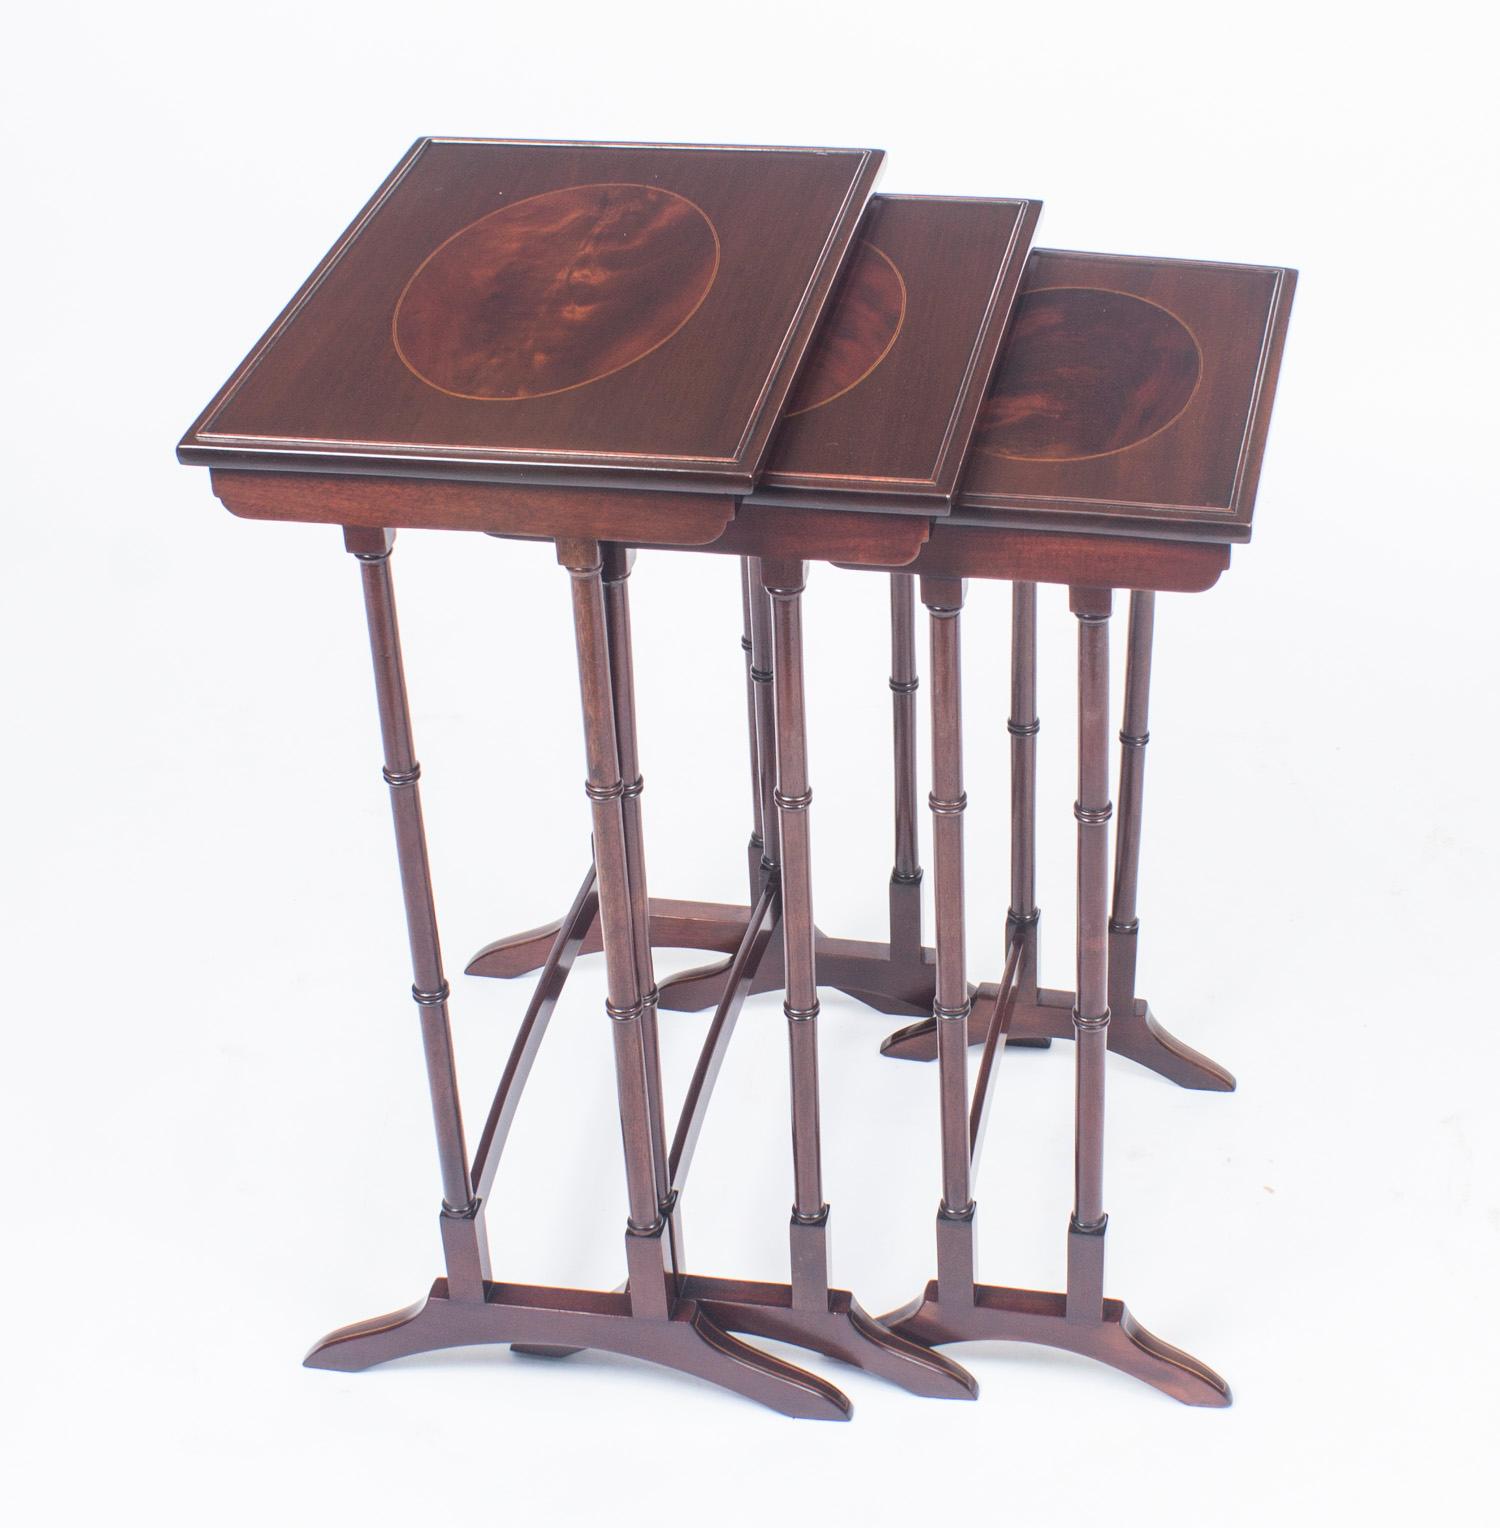 This is a beautiful antique Edwardian mahogany and inlaid nest of tables, circa 1880 in date. 

The nest consists of a set of three matching interlocking tables, each has a rich flame mahogany ovel inlaid panel surrounded by ebony and boxwood